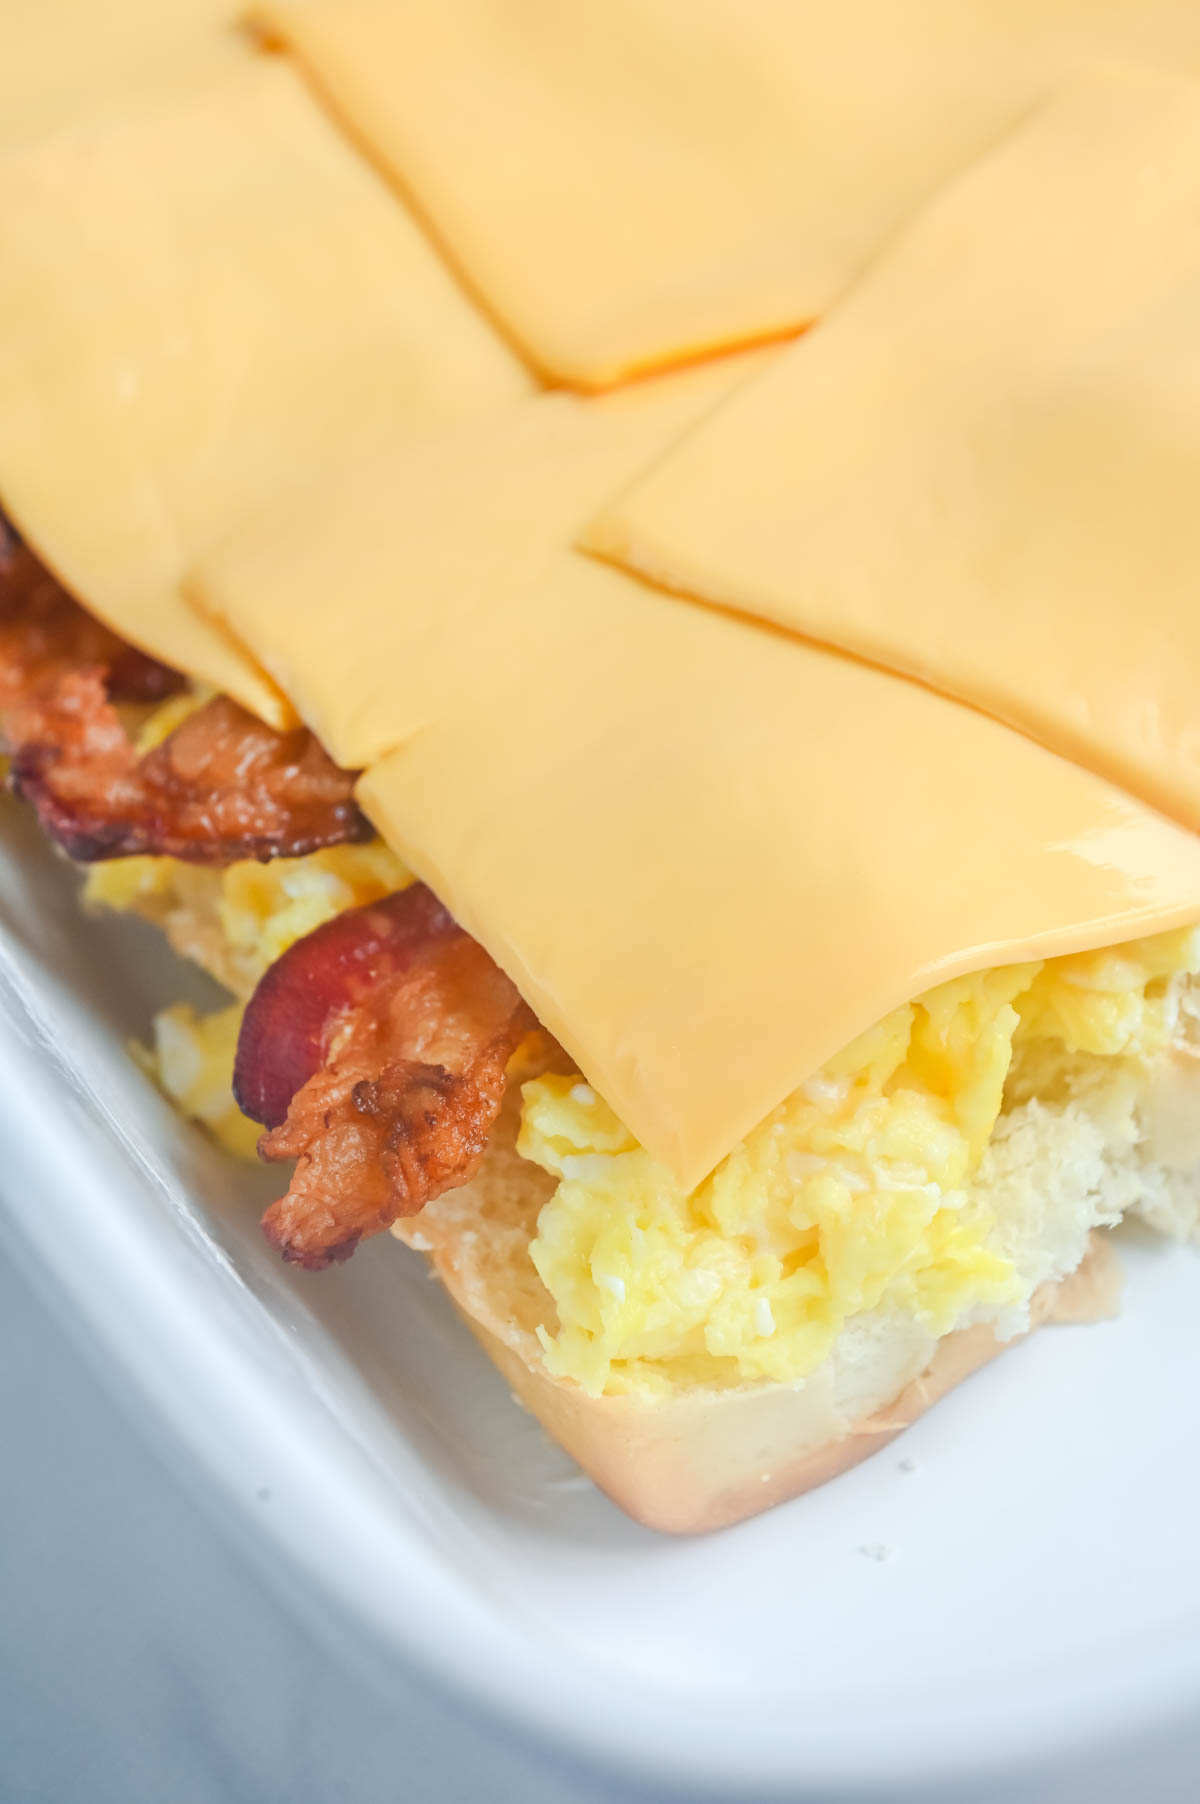 Breakfast sandwich with bacon and cheese on a white plate.